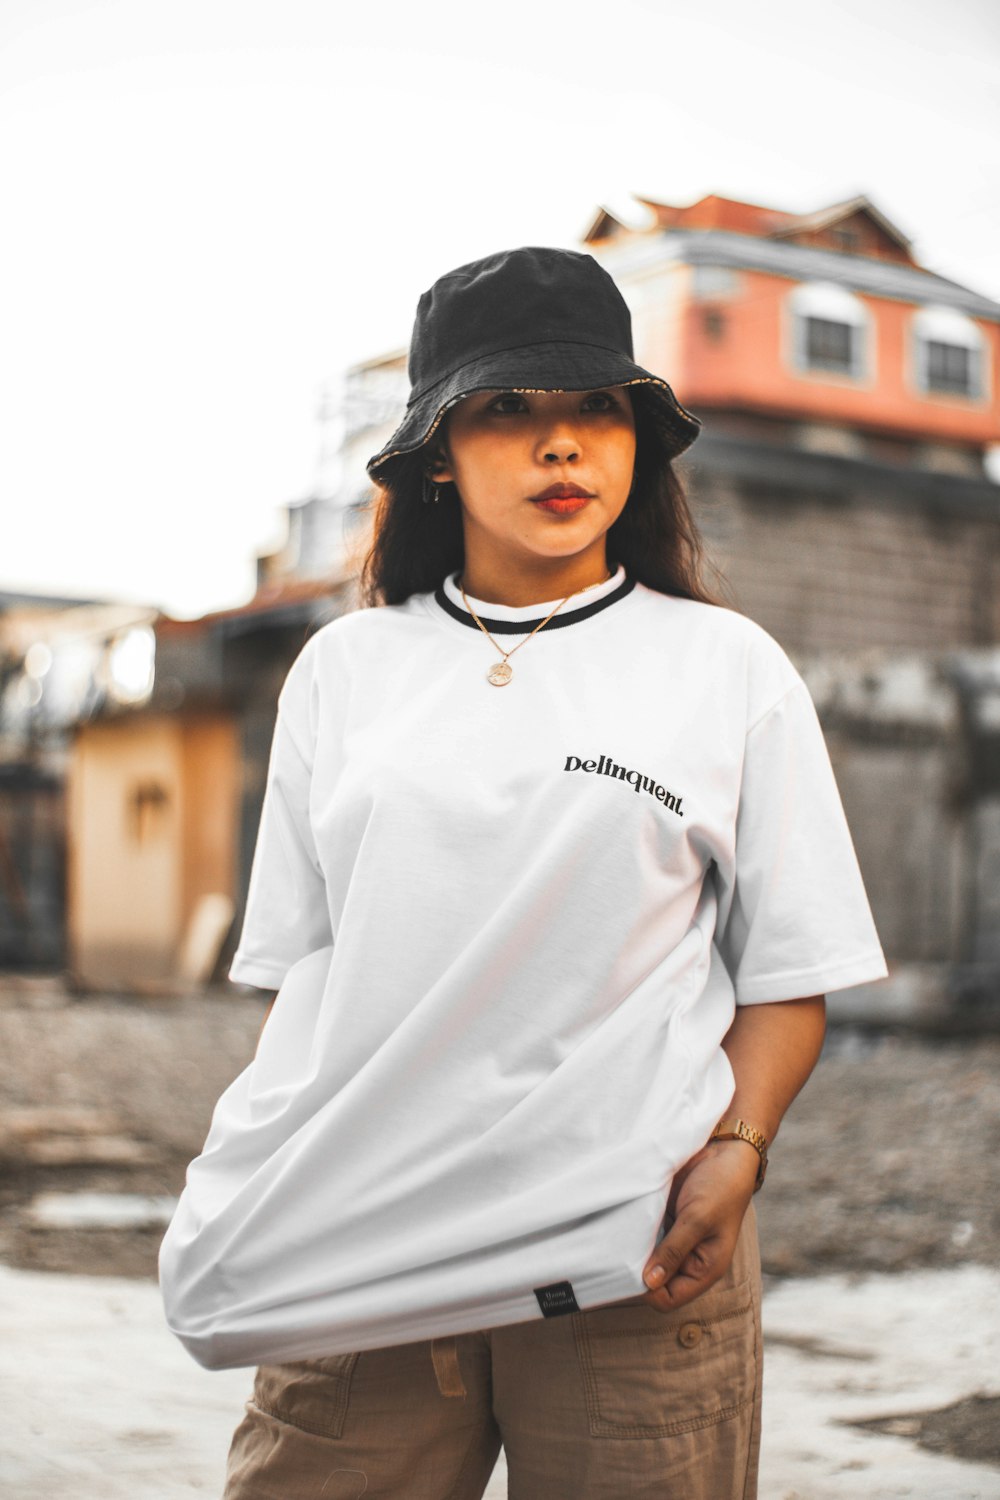 woman in white crew neck t-shirt and black cap standing on street during daytime